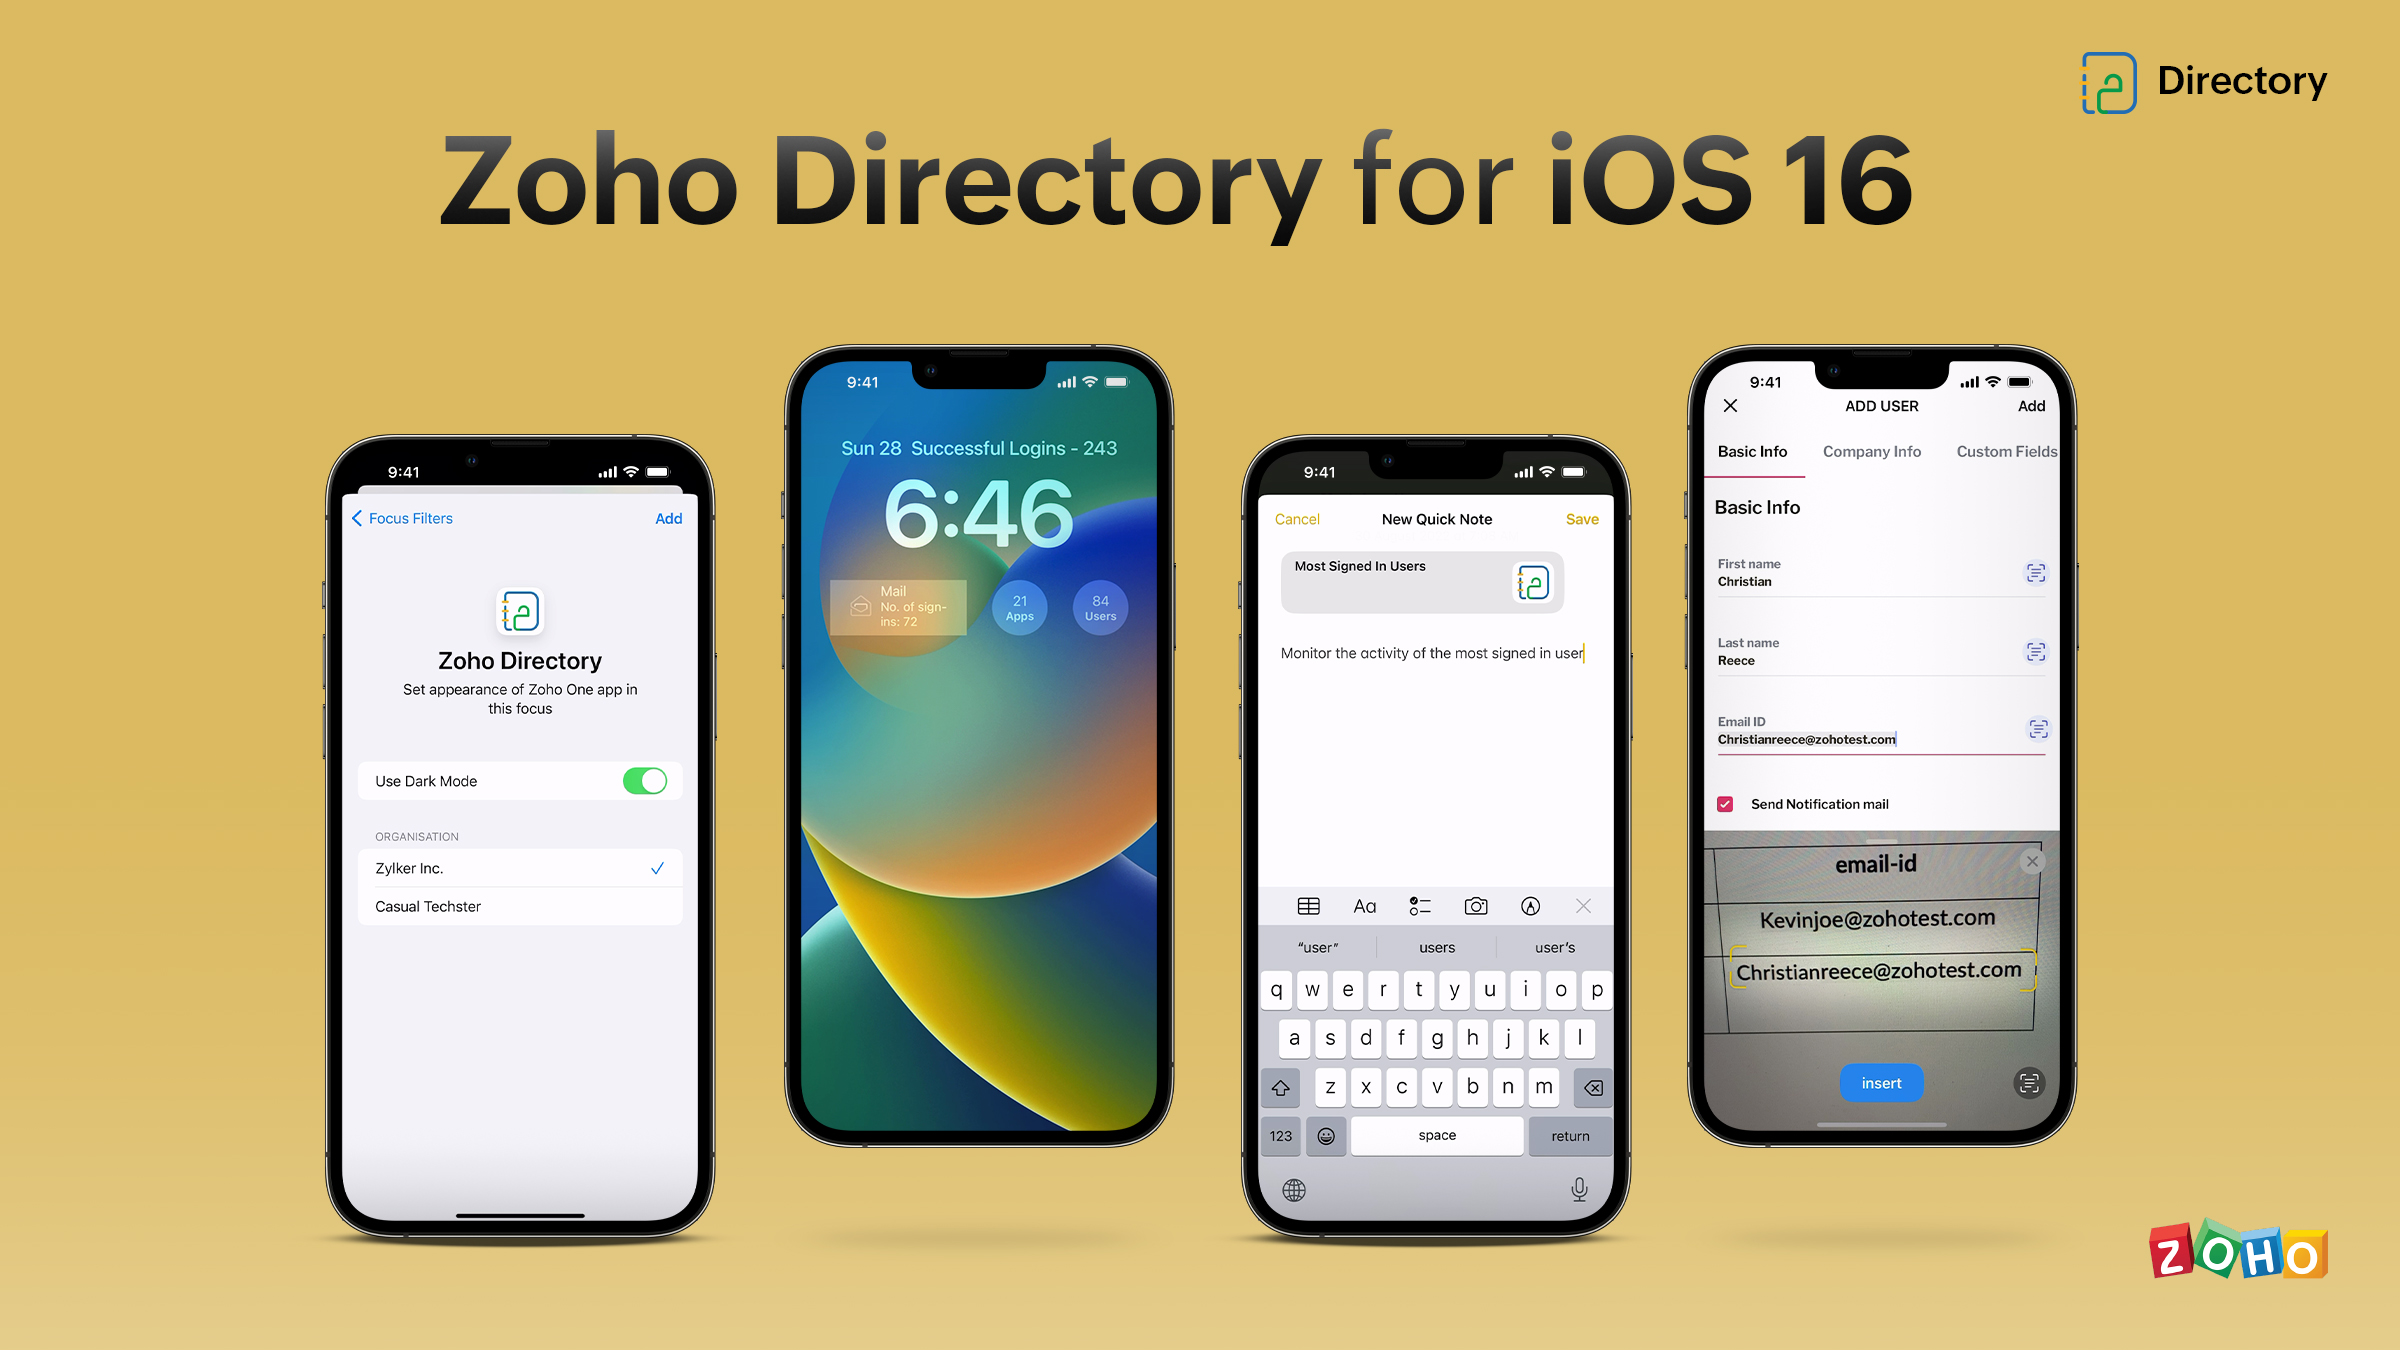 iOS 16: Zoho Directory's all-new Focus filters, Lock Screen widgets, and more!